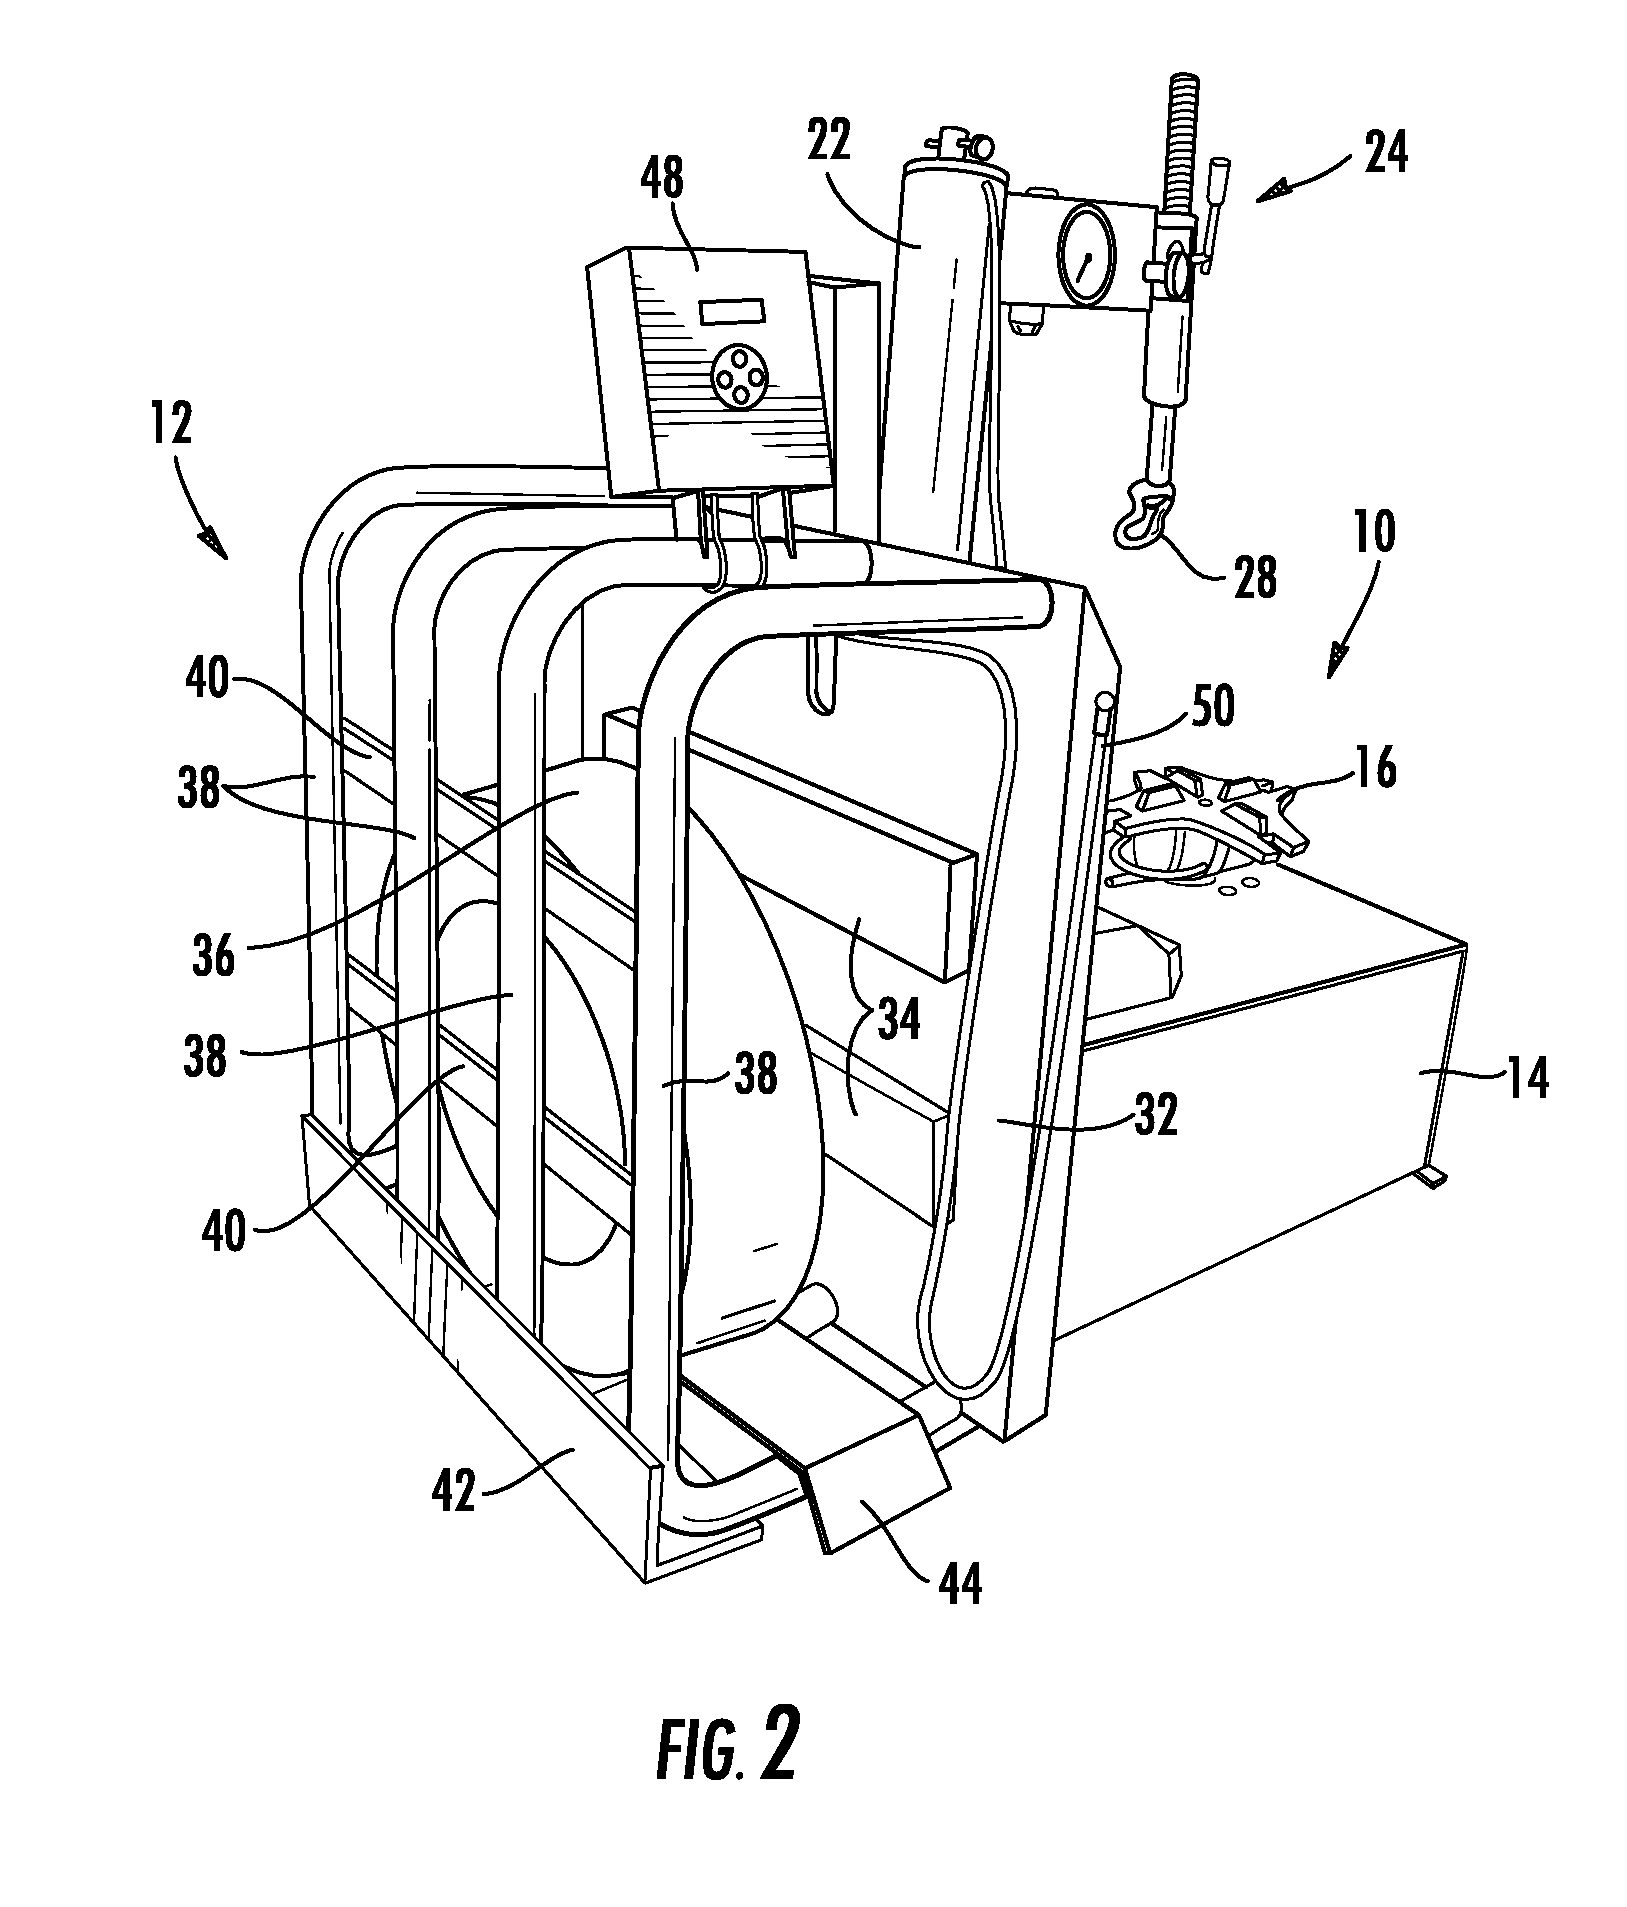 Tire changer with attached inflation cage